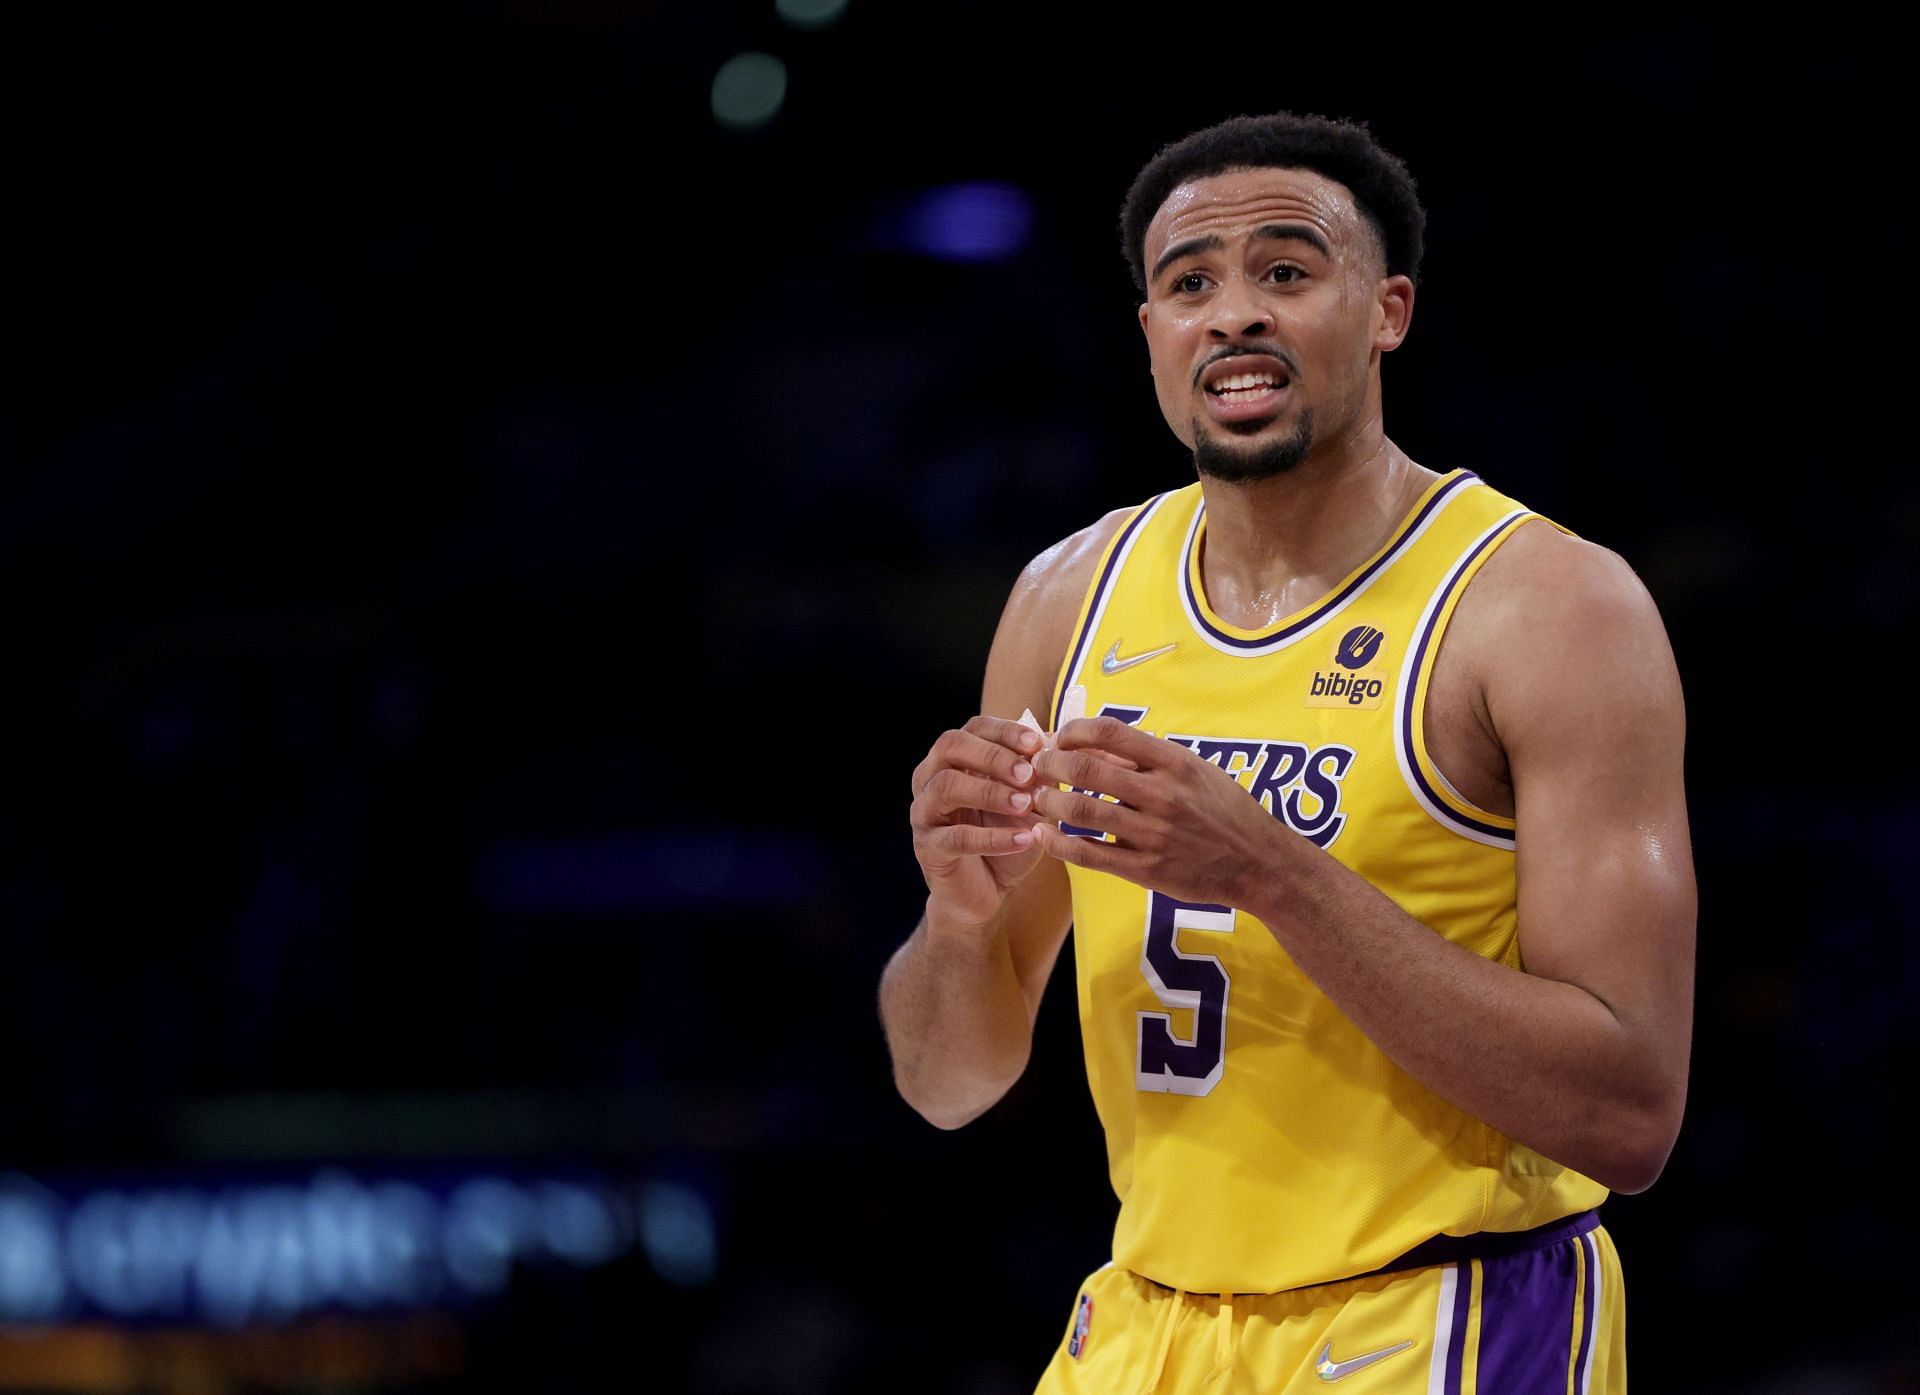 Talen Horton-Tucker of the LA Lakers reacts to his charging foul during a 122-114 win over the Sacramento Kings on Jan. 4, 2022 in Los Angeles, California.